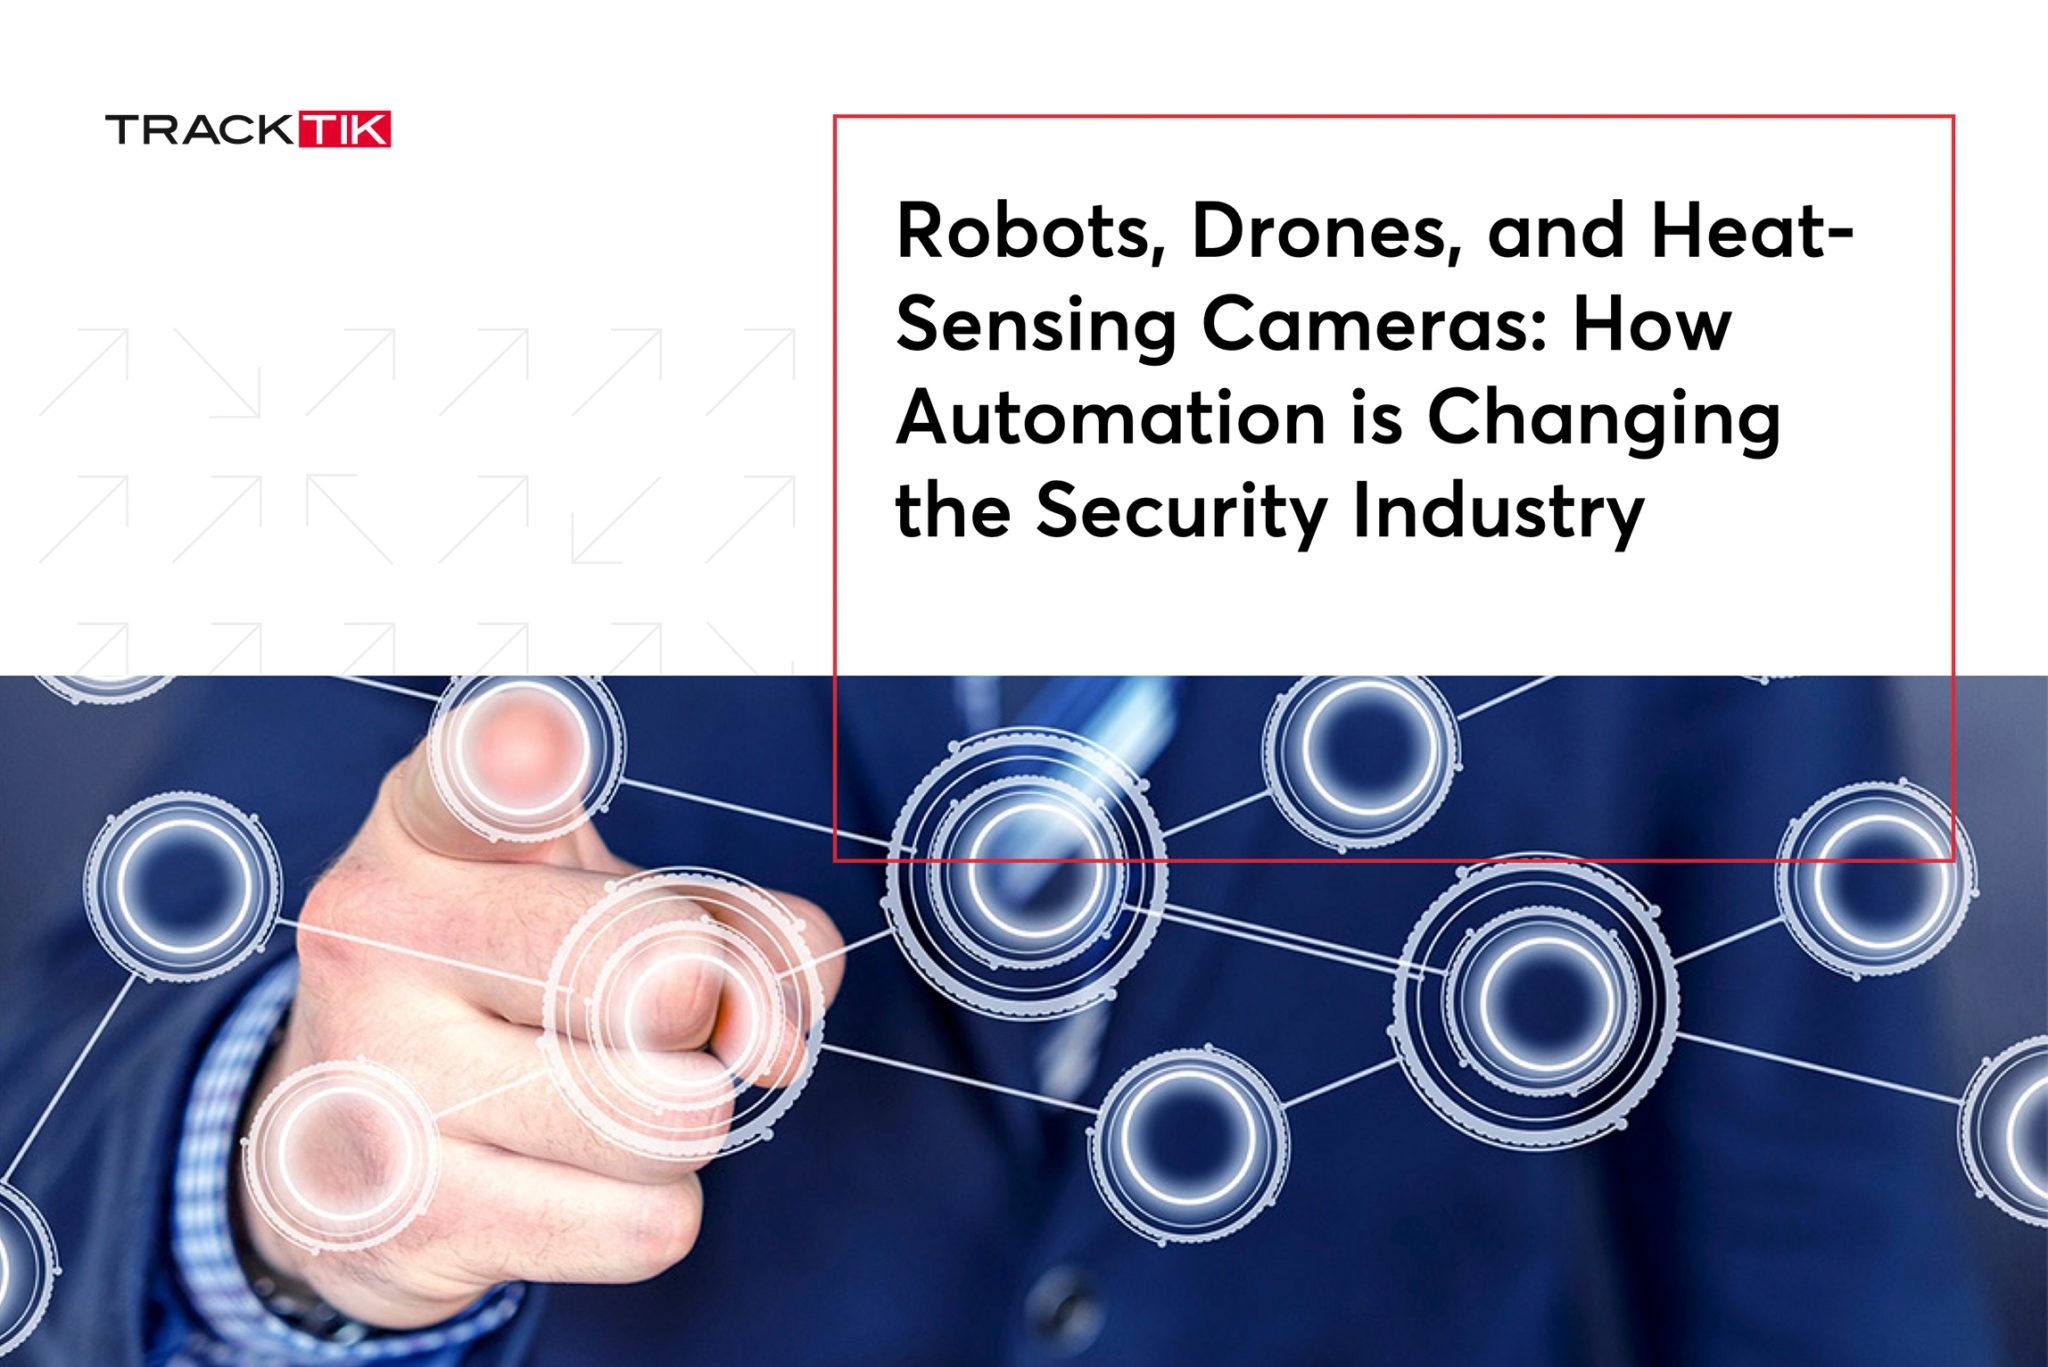 Robots, Drones, and Heat- Sensing Cameras: How Automation is Changing the Security Industry